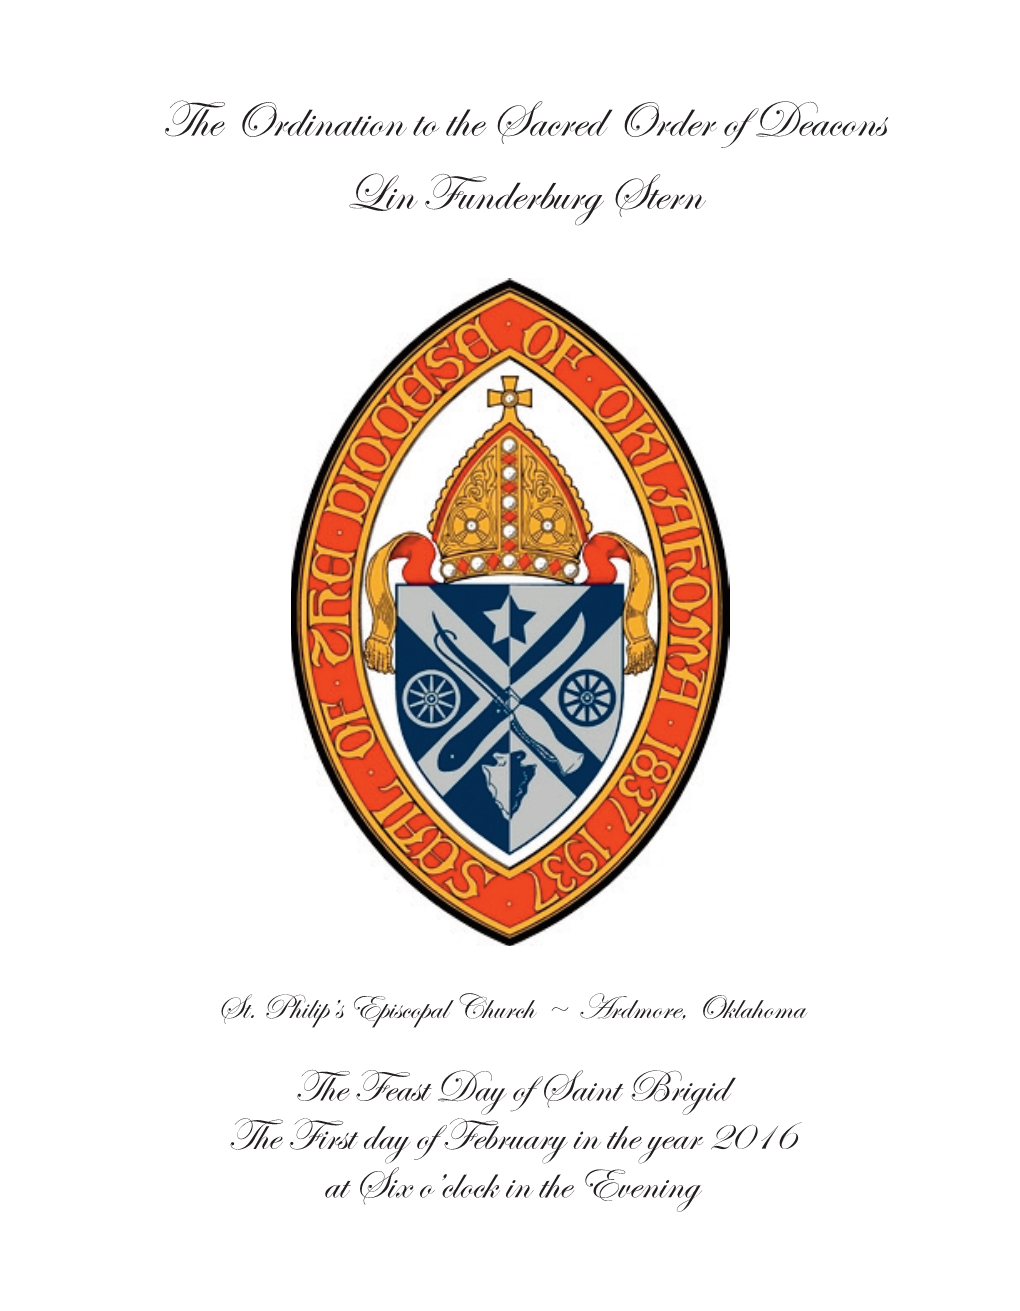 The Ordination to the Sacred Order of Deacons Lin Funderburg Stern